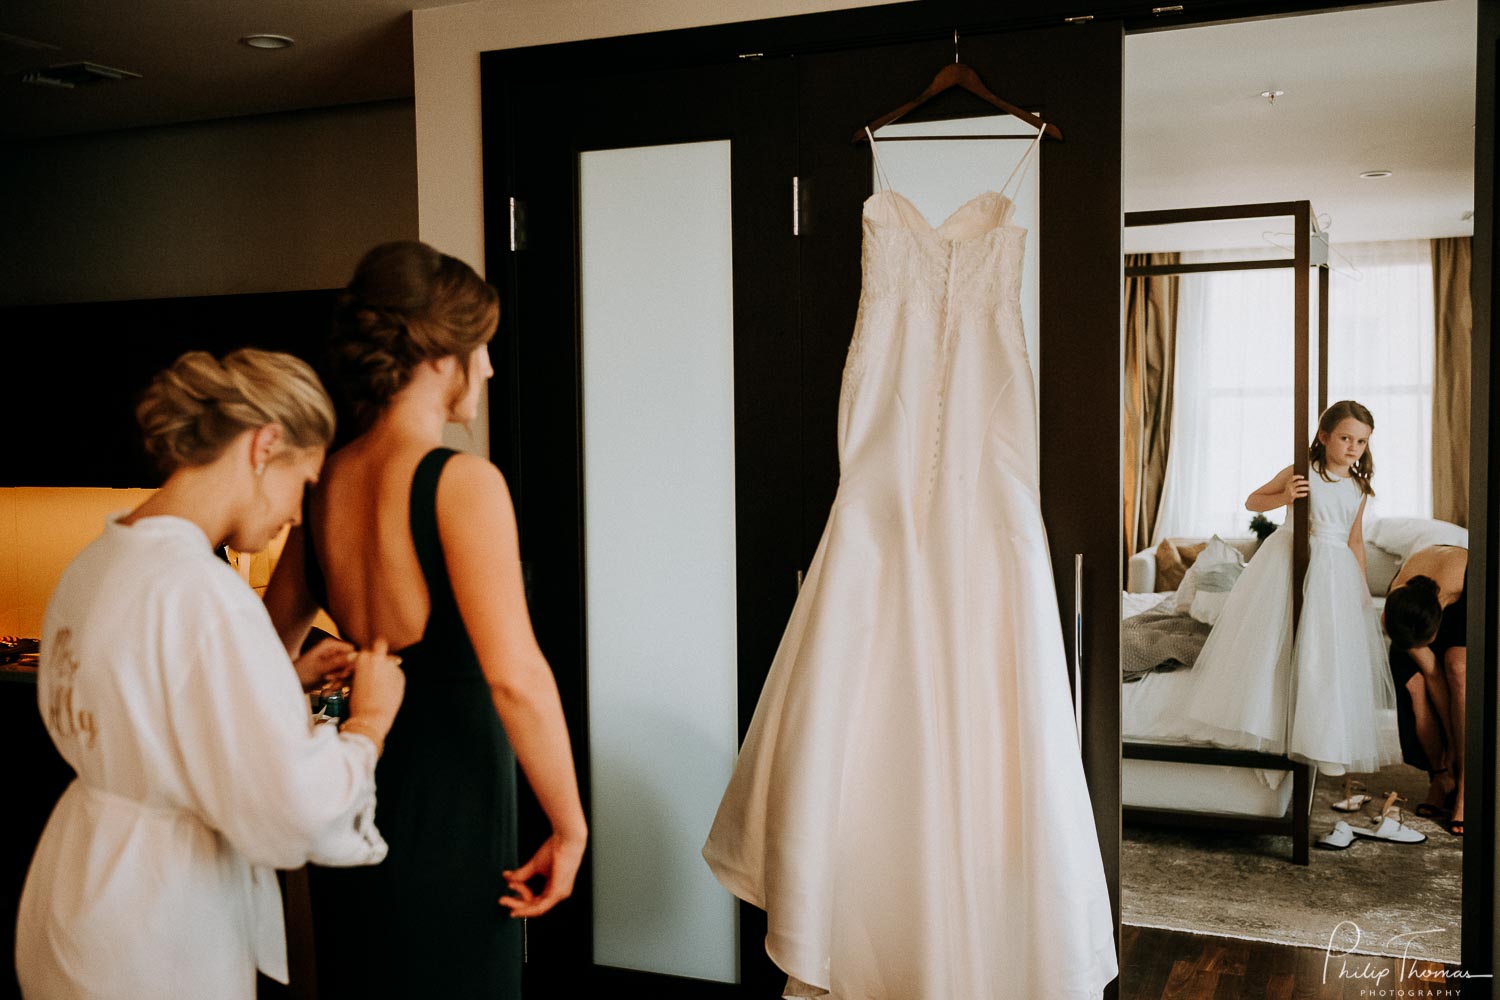 17-The JW Marriott Downtown Houston bride and groom get ready -Philip Thomas Photography